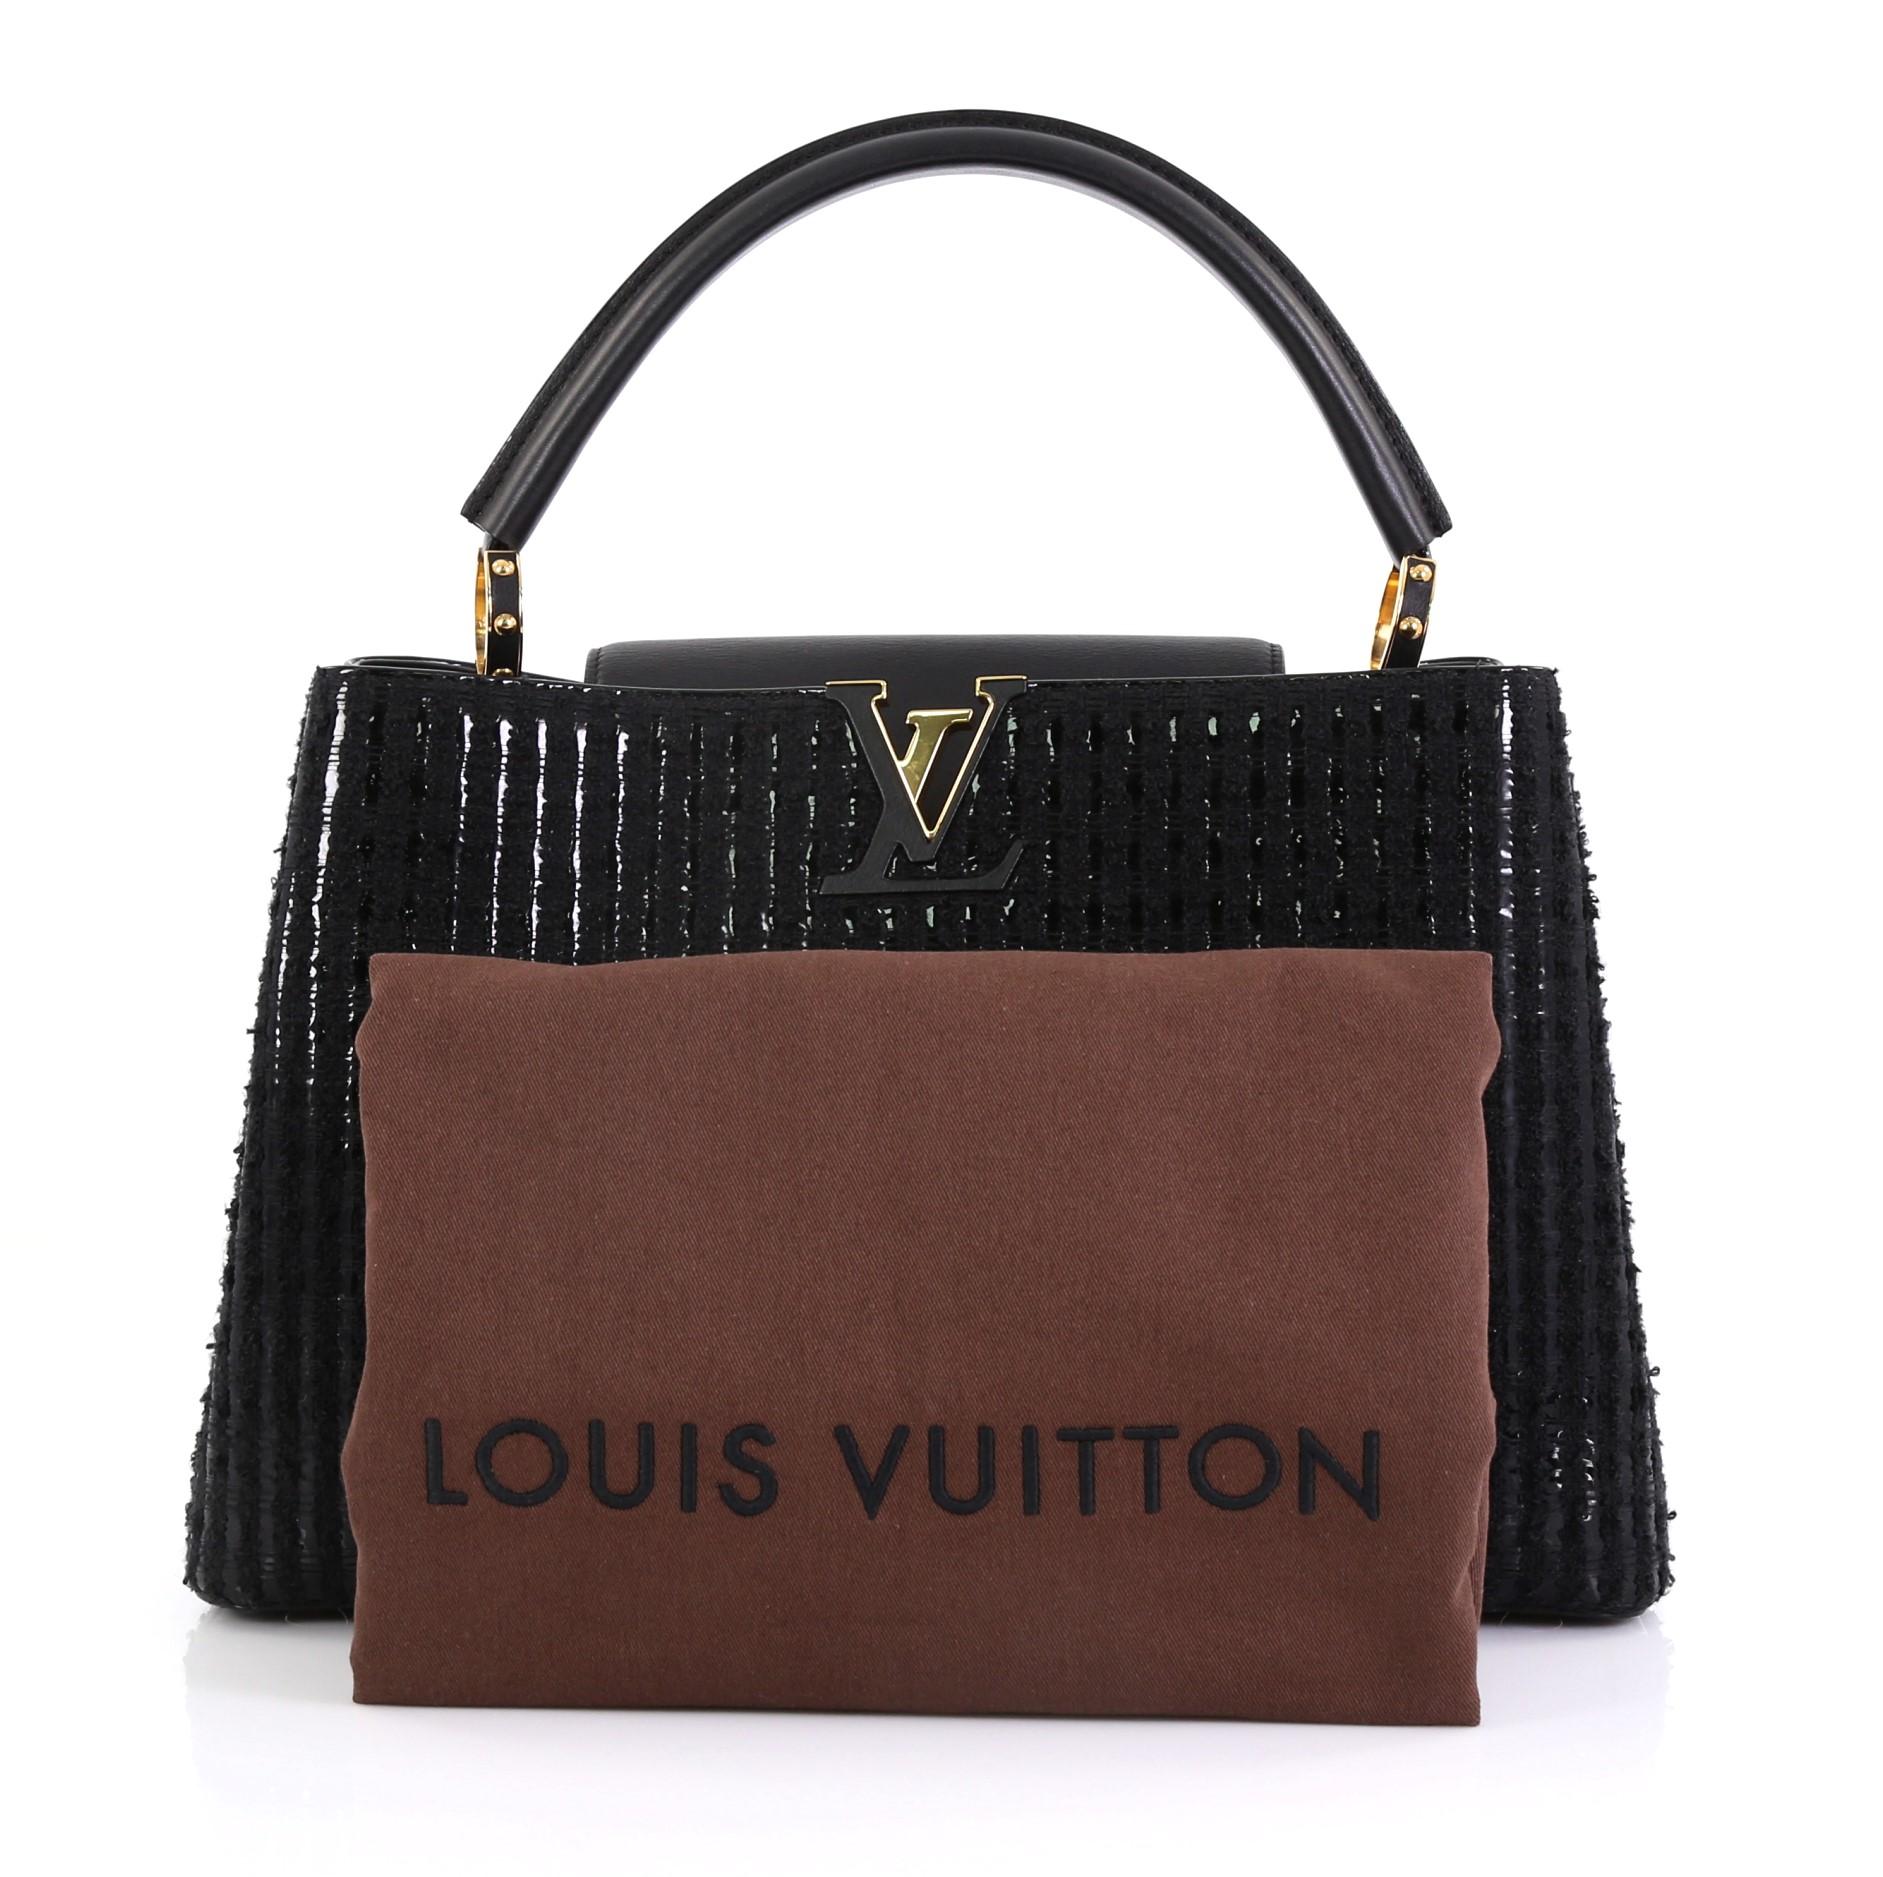 This Louis Vuitton Capucines Handbag Tweed MM, crafted in black tweed and leather, features a single loop leather handle secured by jewel-like rings, frontal flap, and gold-tone hardware. Its flap can be tucked inside to reveal the LV logo and opens